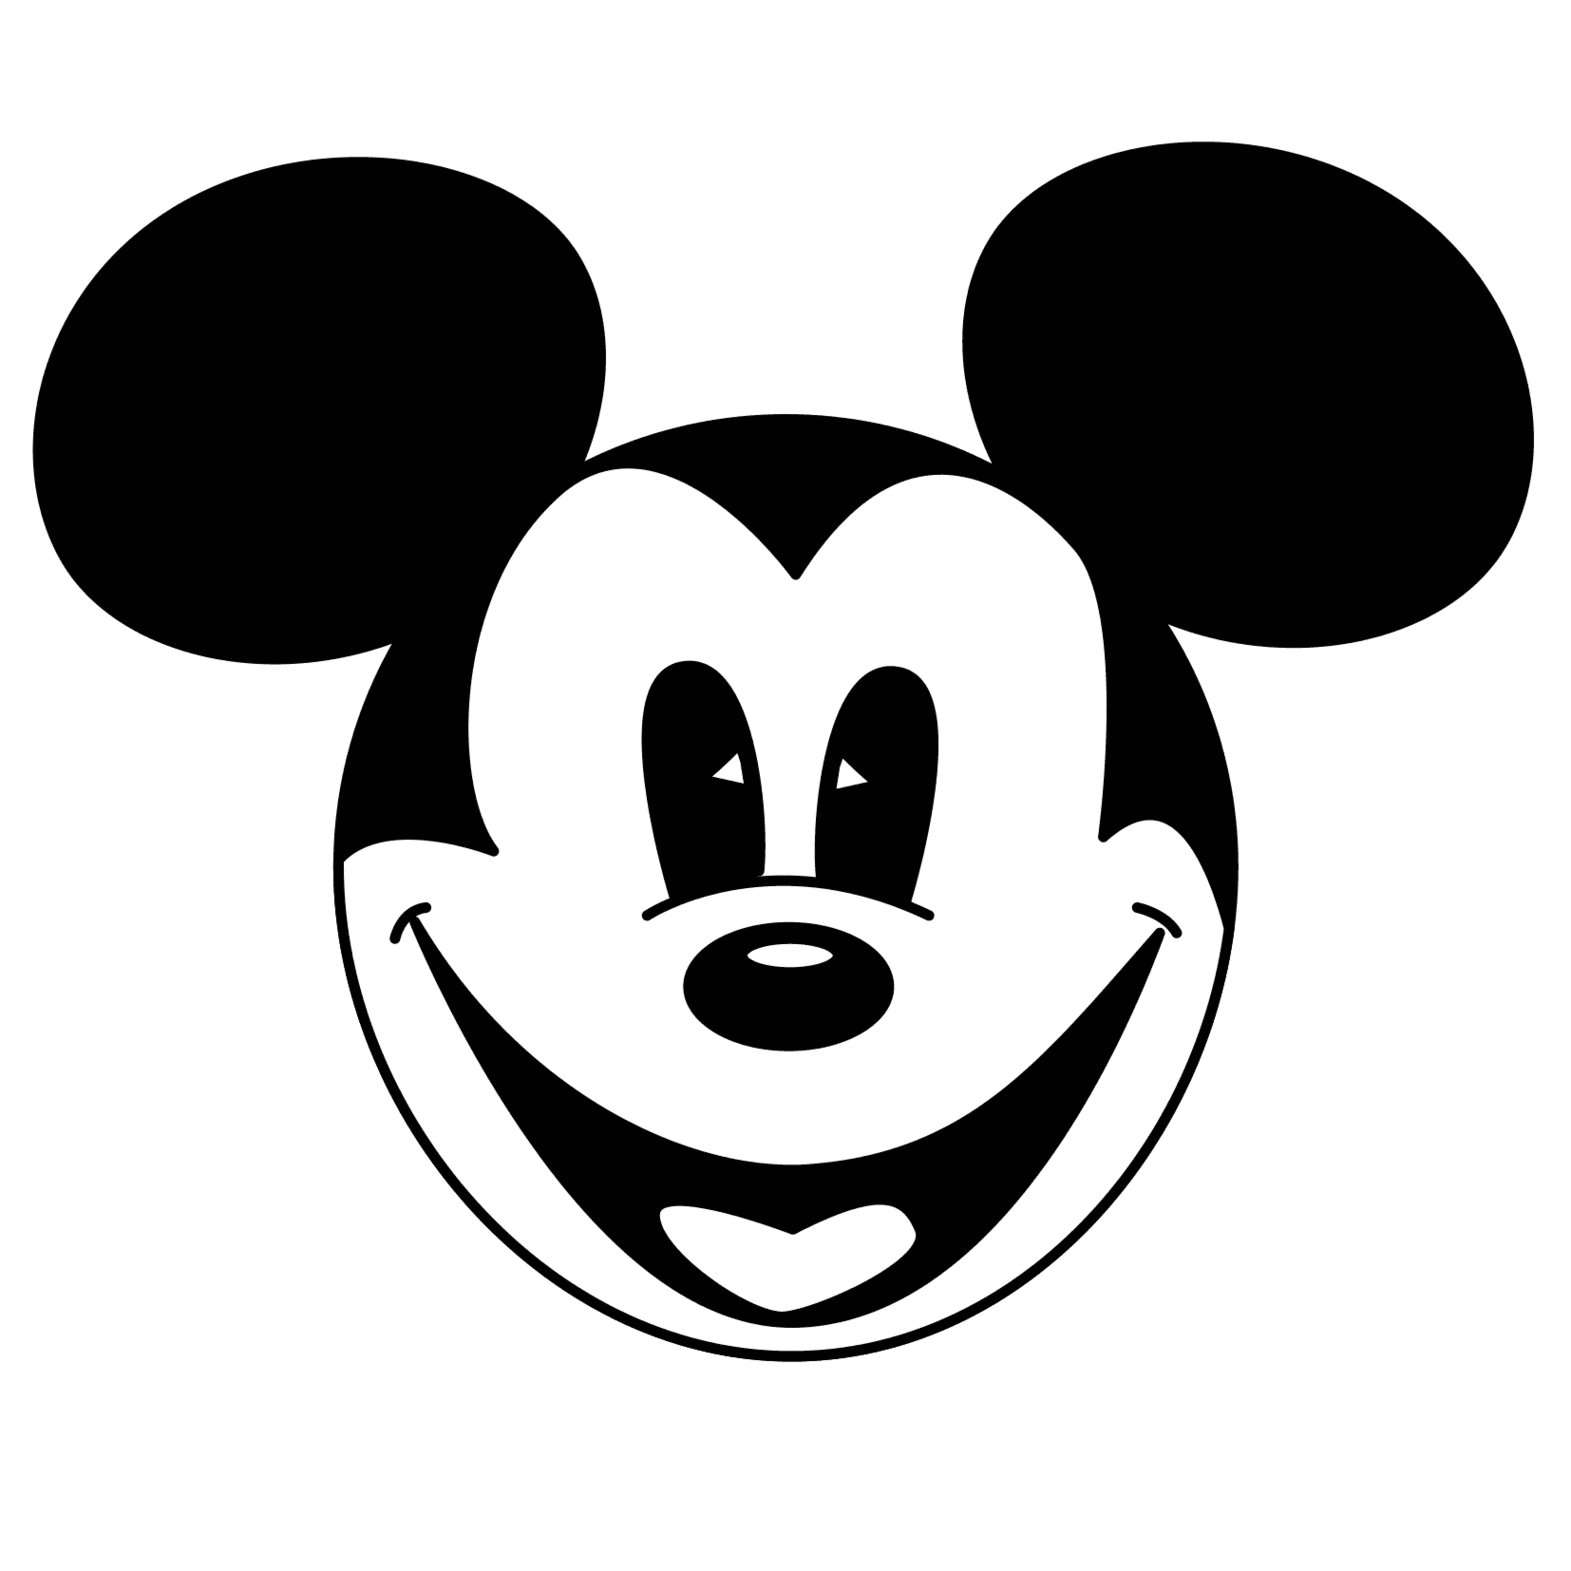 Mickey Logo Clipart - Free to use Clip Art Resource